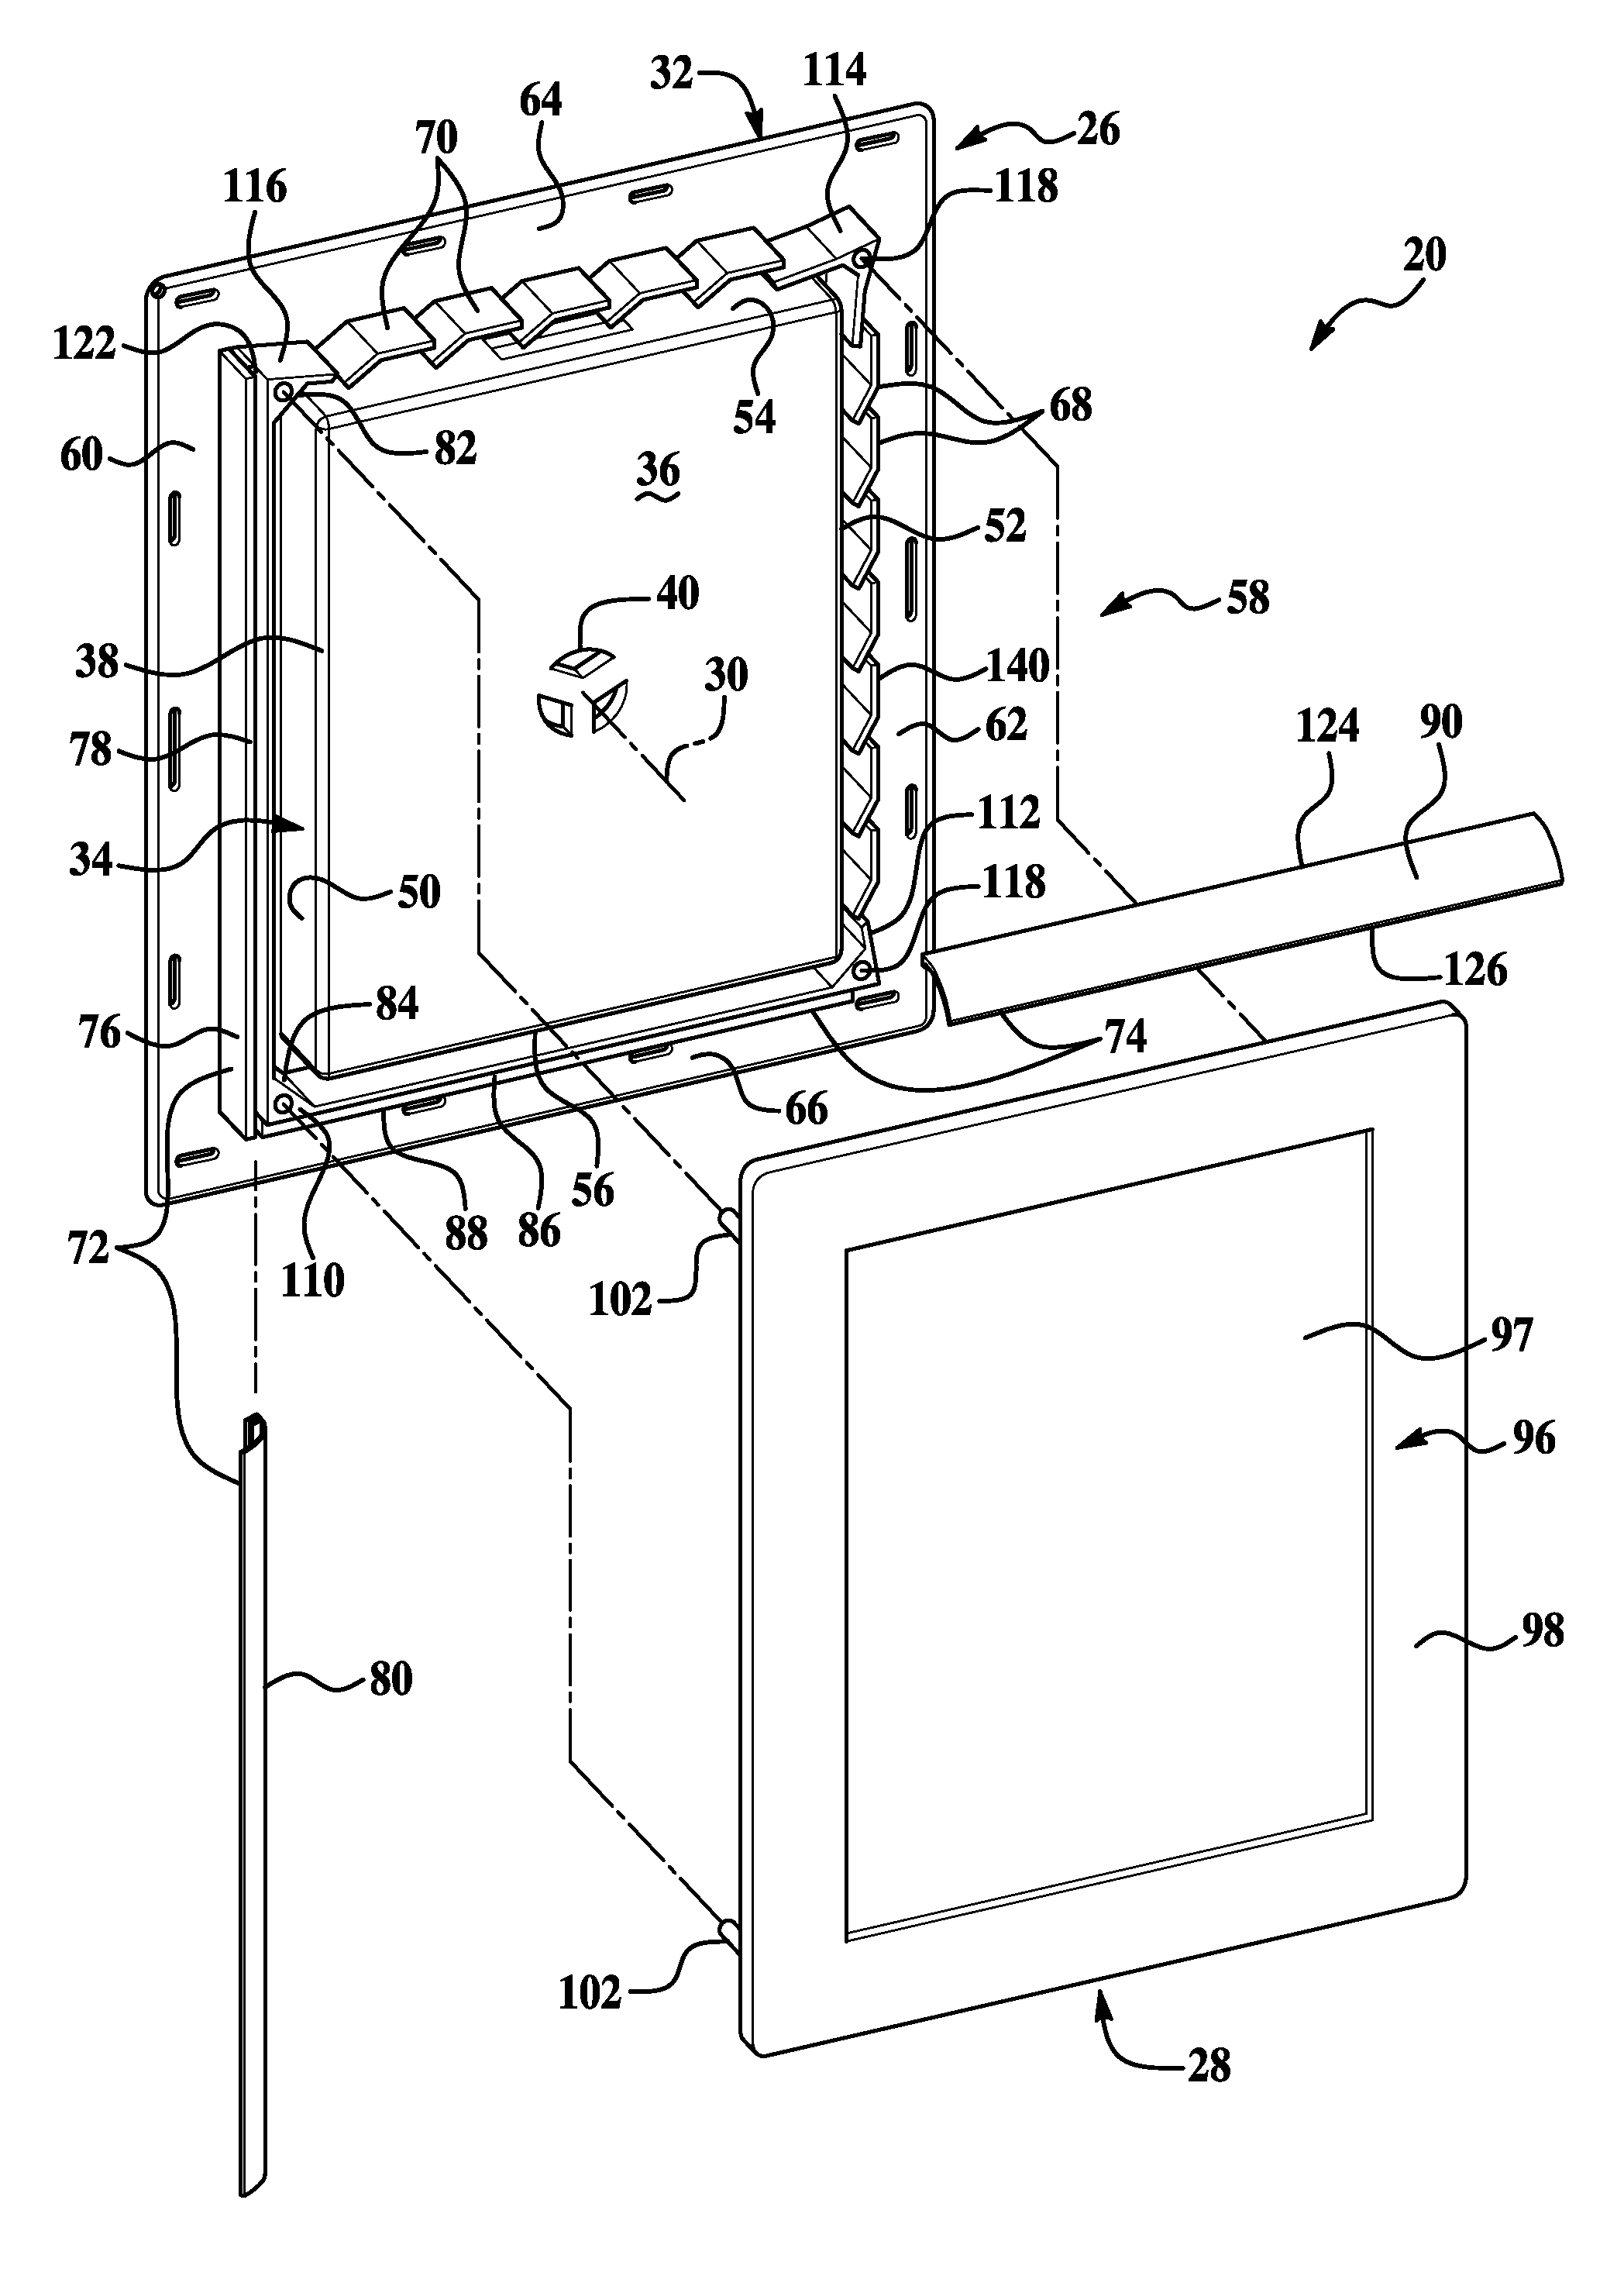 Adjustable mounting bracket assembly for exterior siding